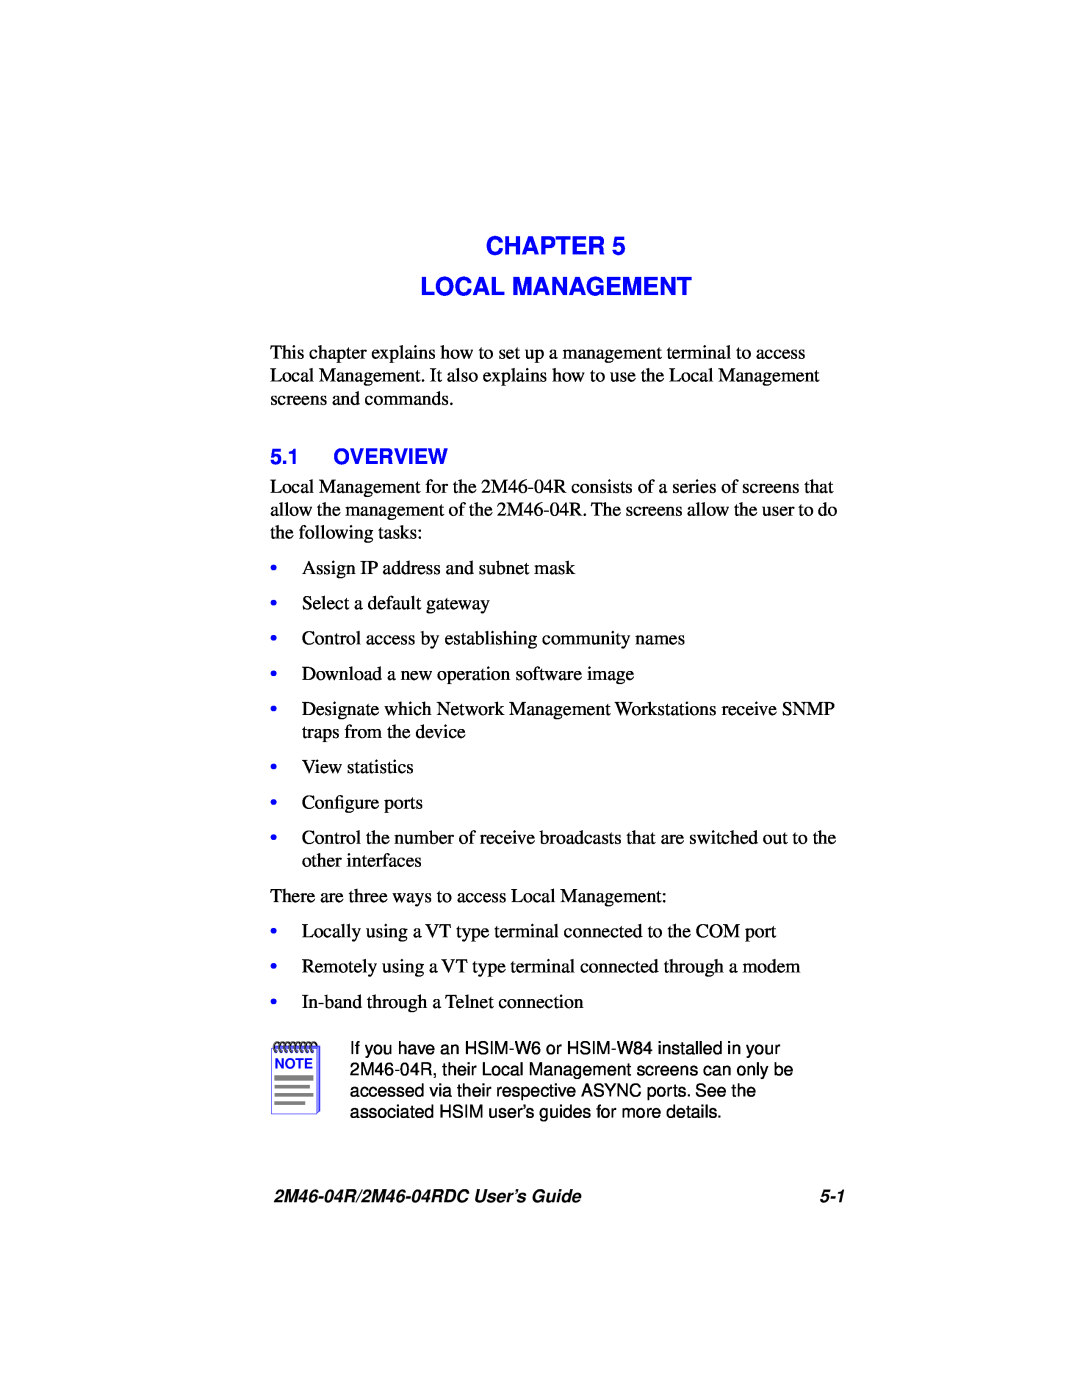 Cabletron Systems pmn manual Chapter Local Management, Overview 